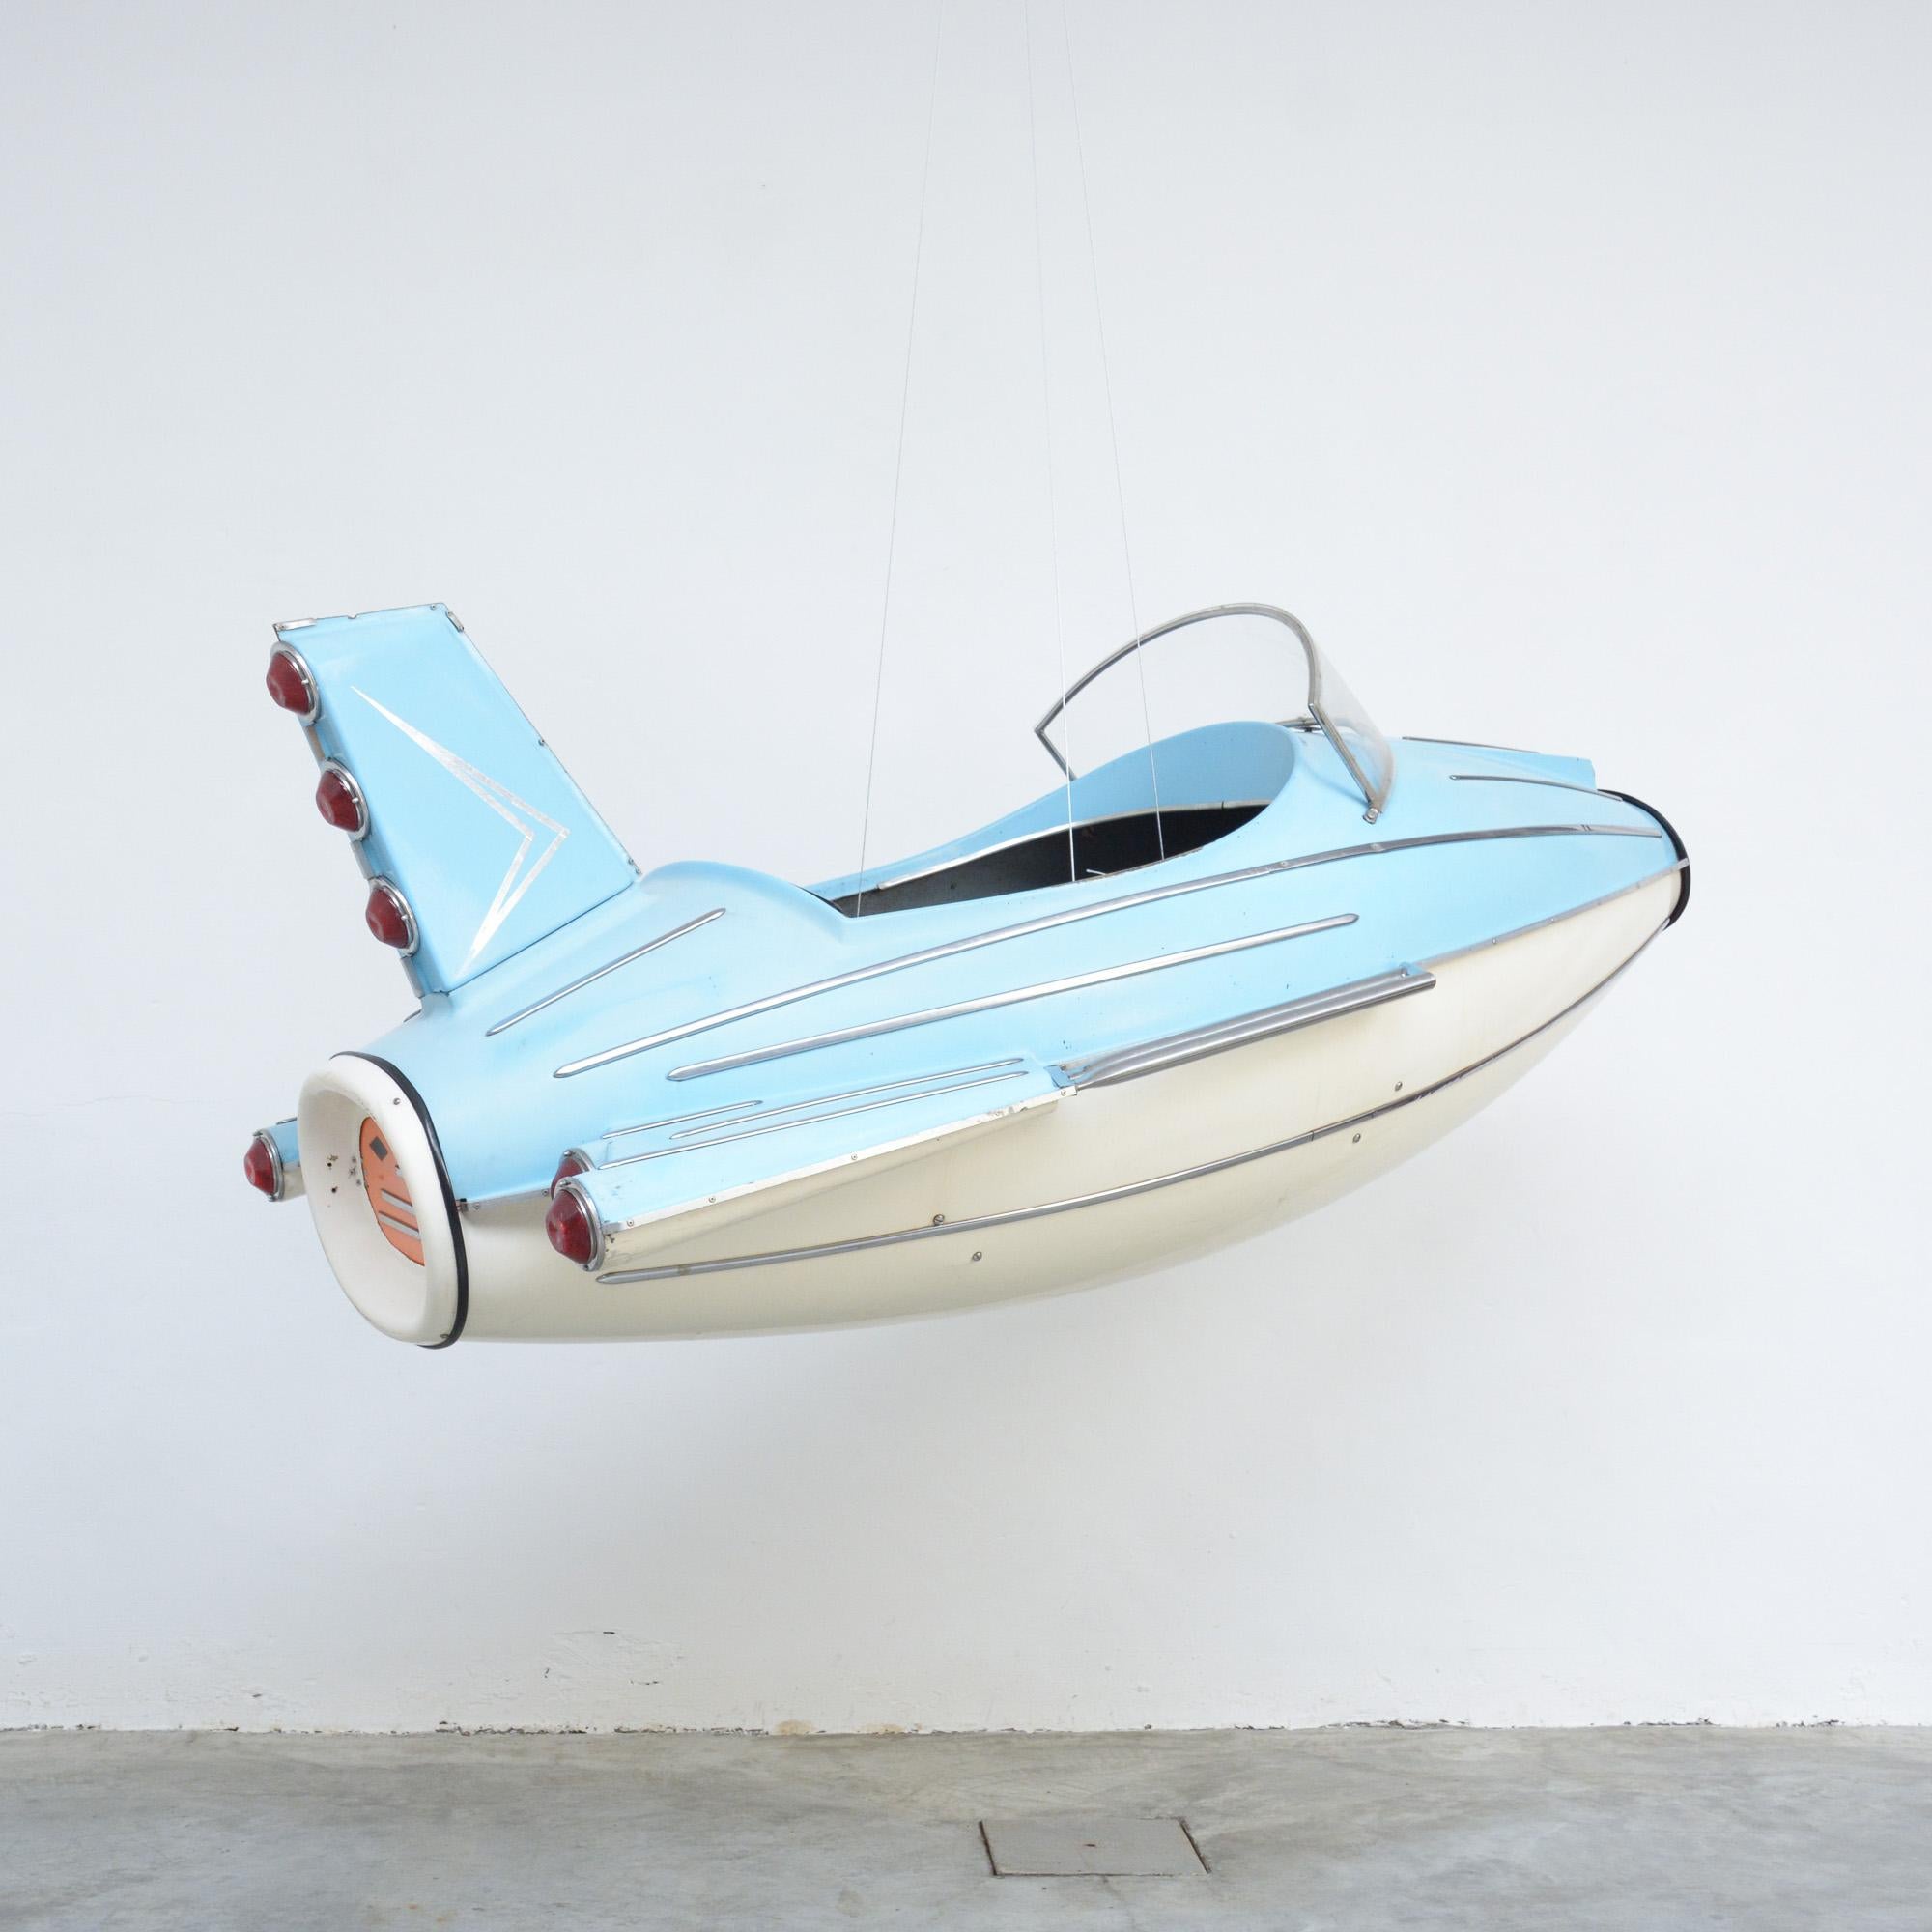 This light blue toy rocket plane once belong to a carousel of the 1960s.
It is made of polyester with metal and plastic details. This exceptional piece is in very good condition. It will be an awesome eyecatcher in any interior.